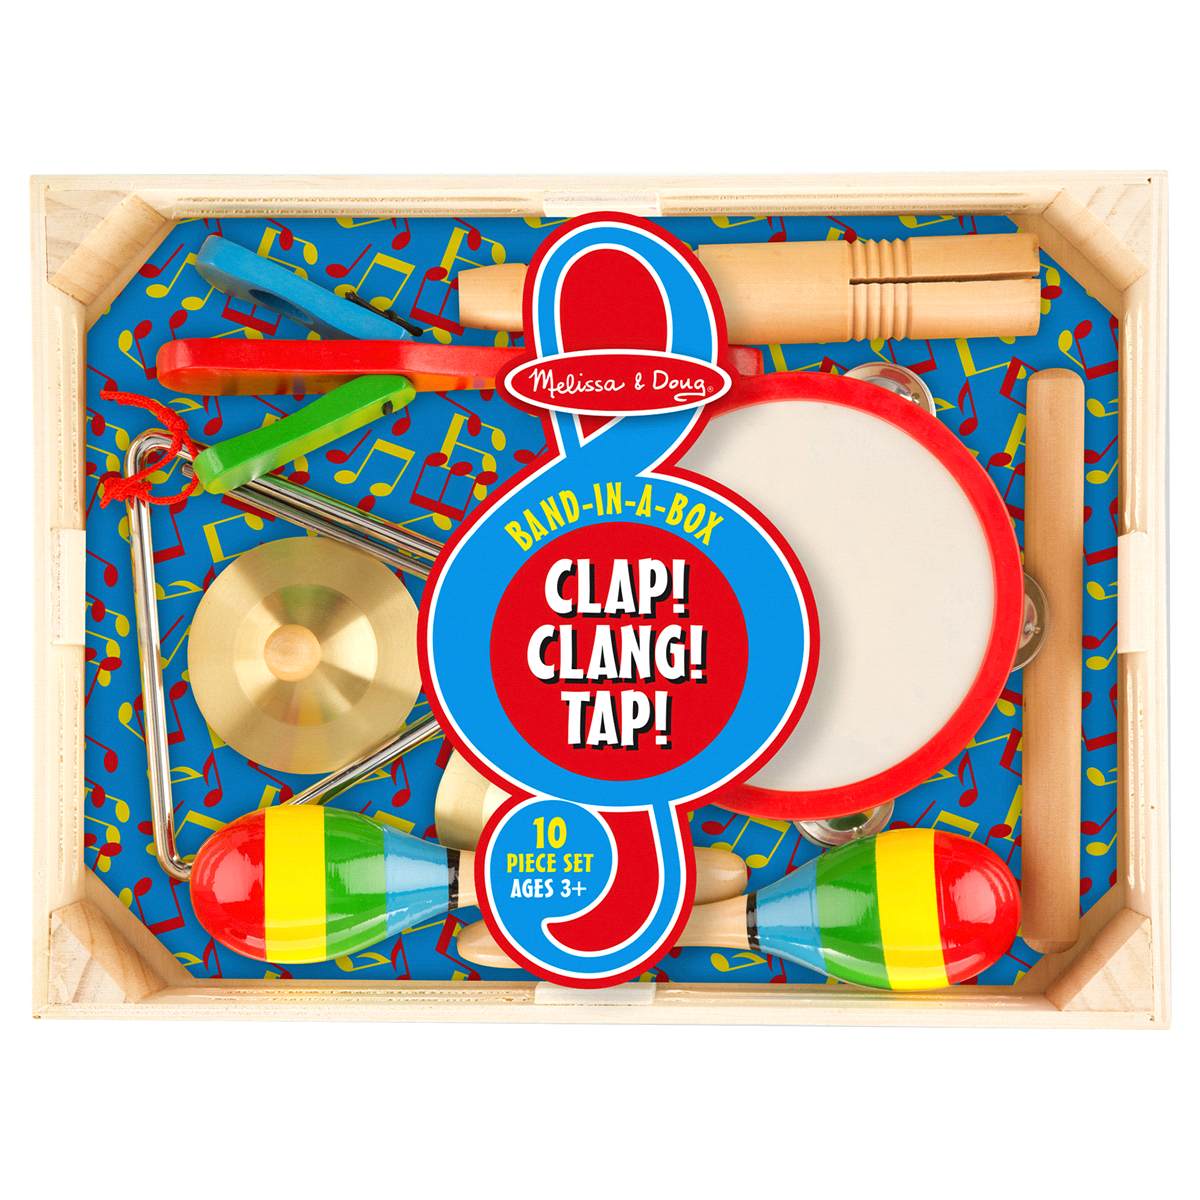 slide 1 of 1, Melissa & Doug Band-in-a-Box Clap! Clang! Tap! Musical Instrument Set, 10 ct